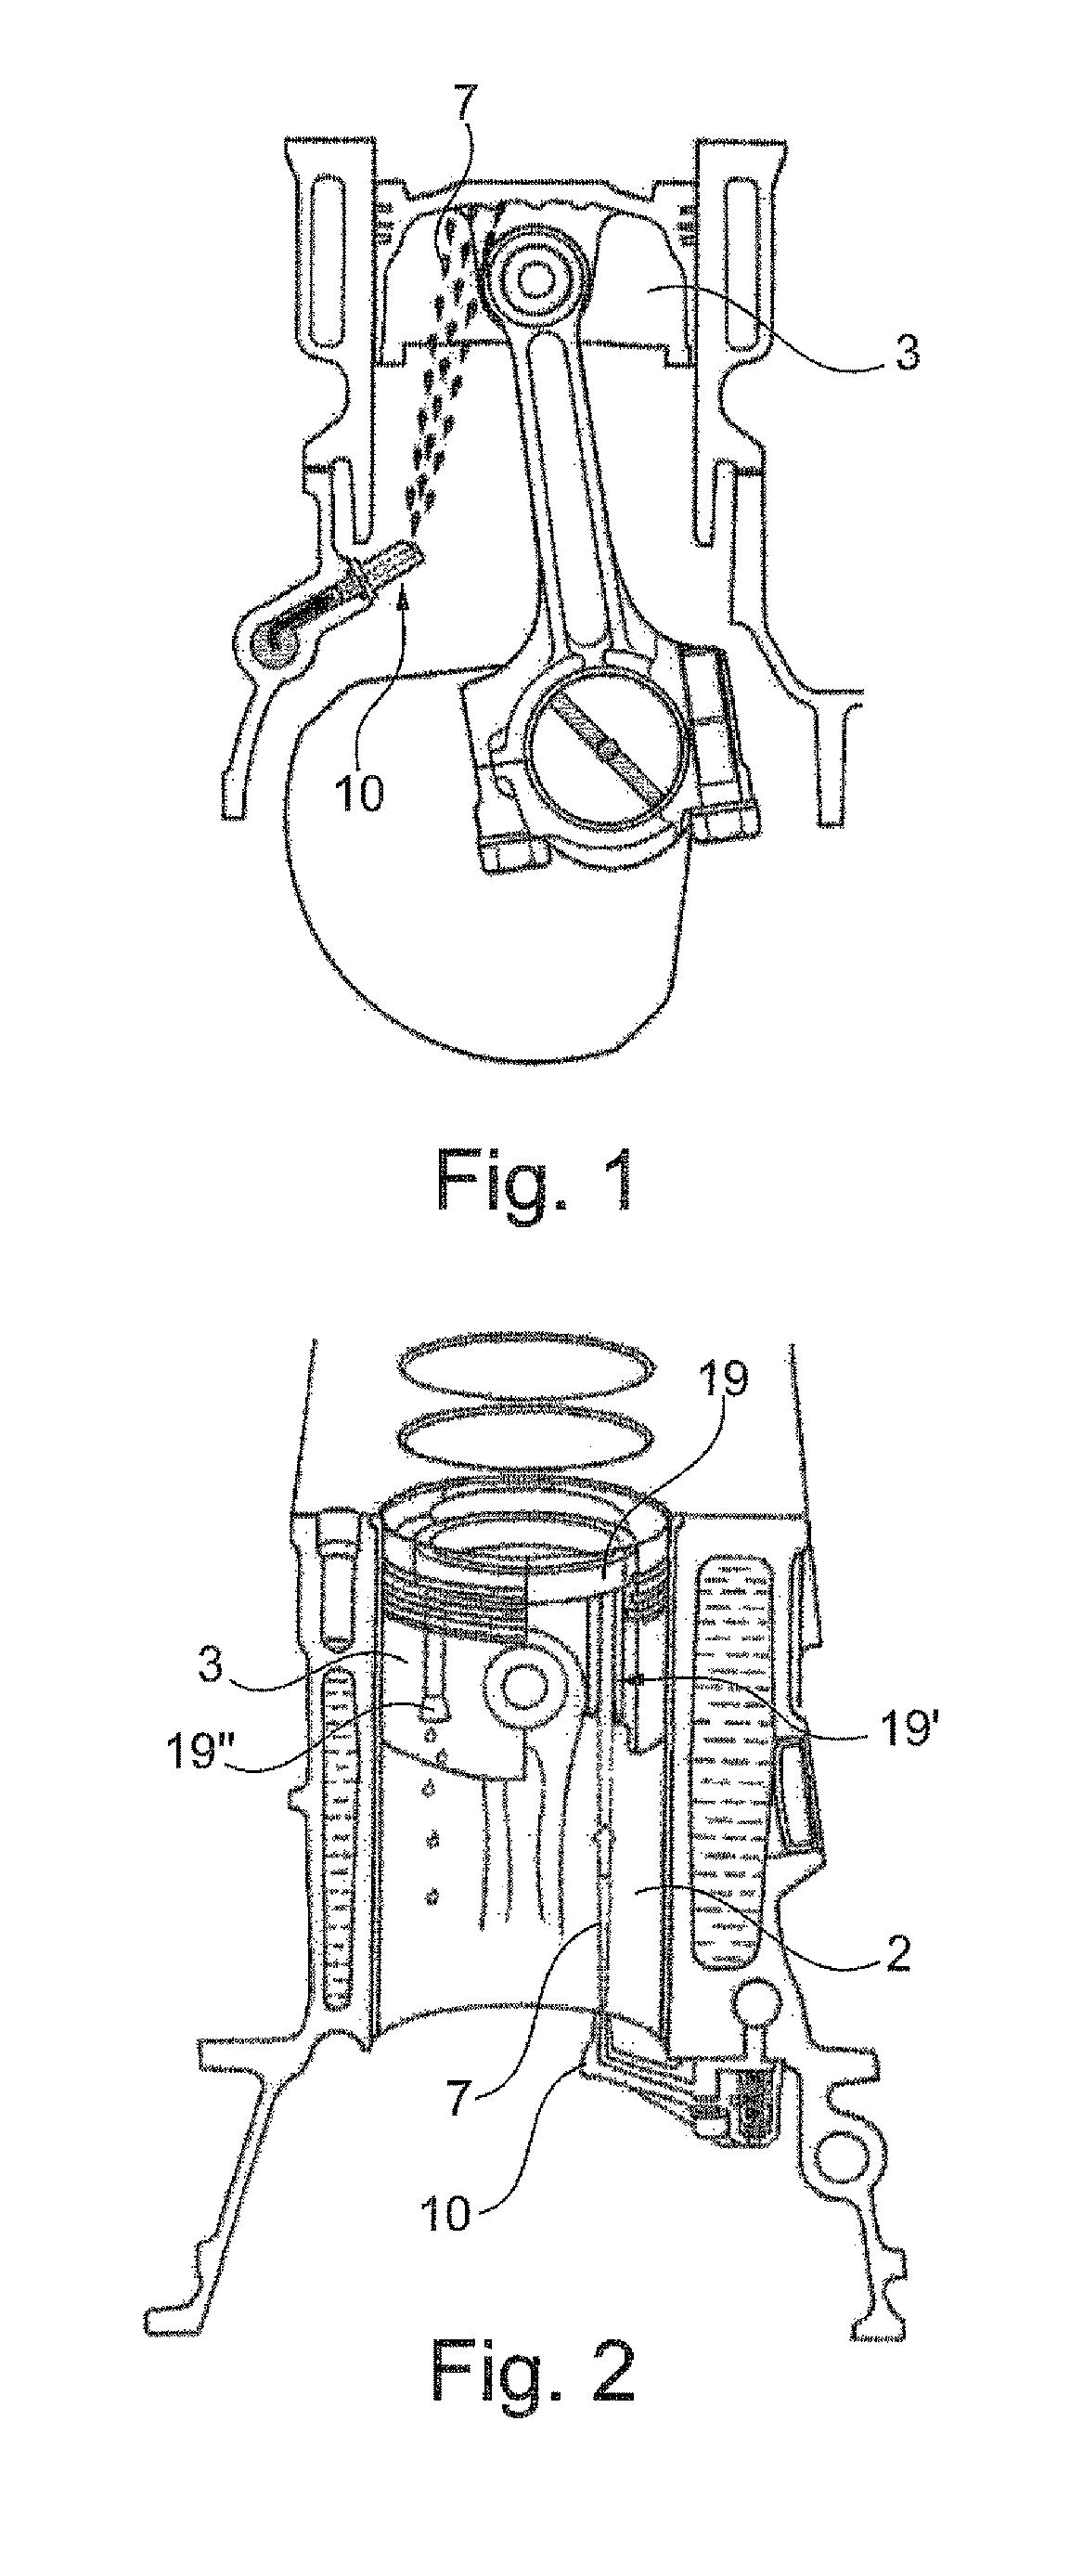 Method for controlling a piston cooling circuit of an internal combustion engine of an industrial vehicle